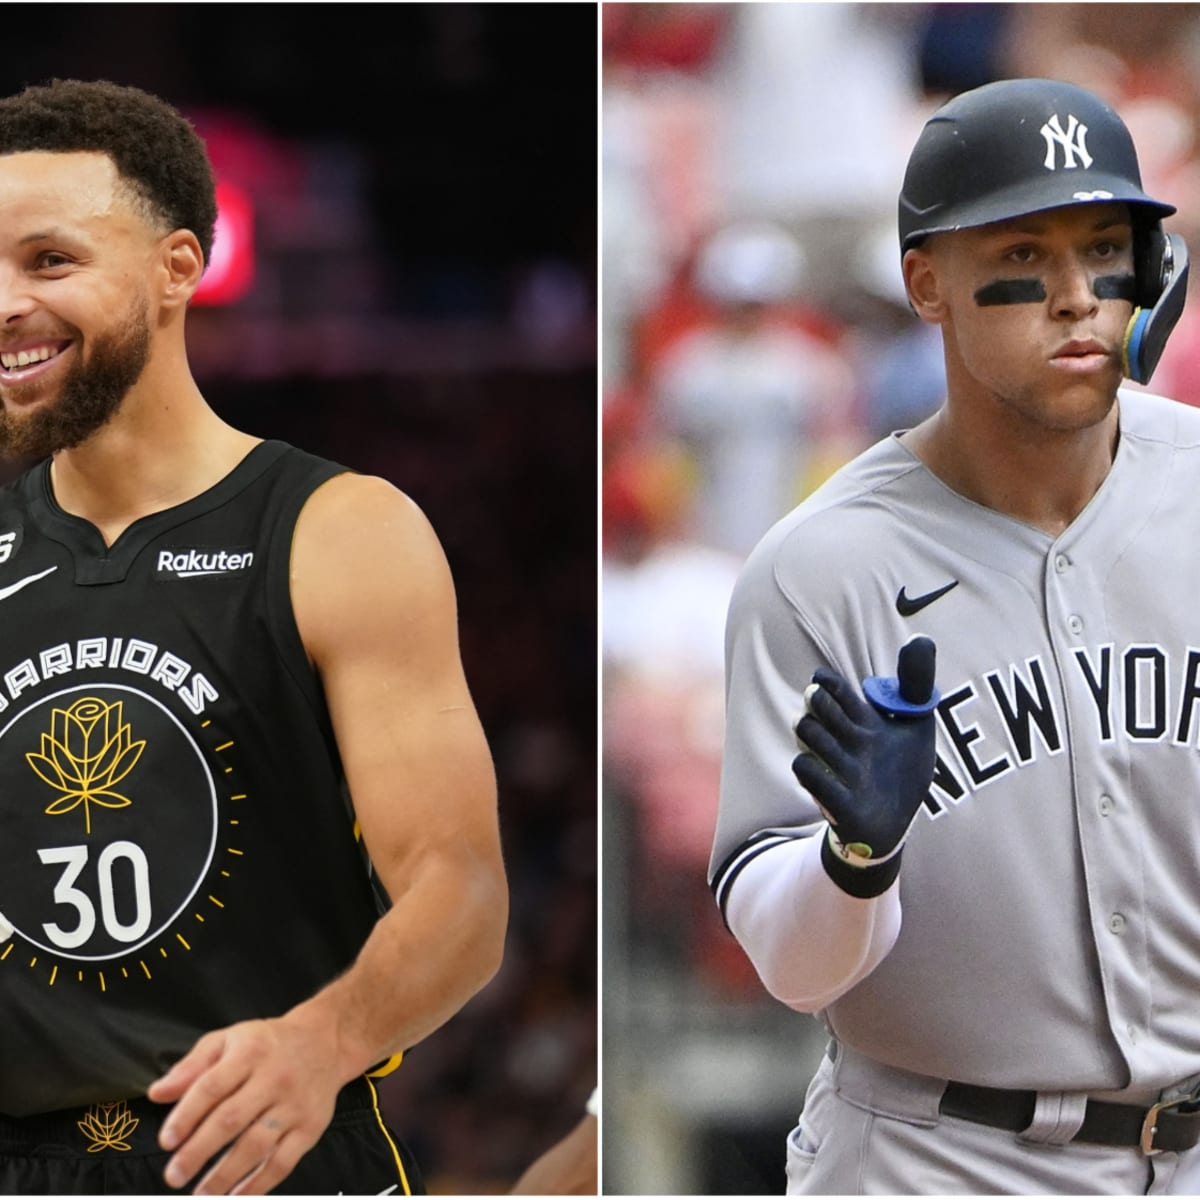 Steph Curry channeling inner Red Sox fan in Aaron Judge Giants